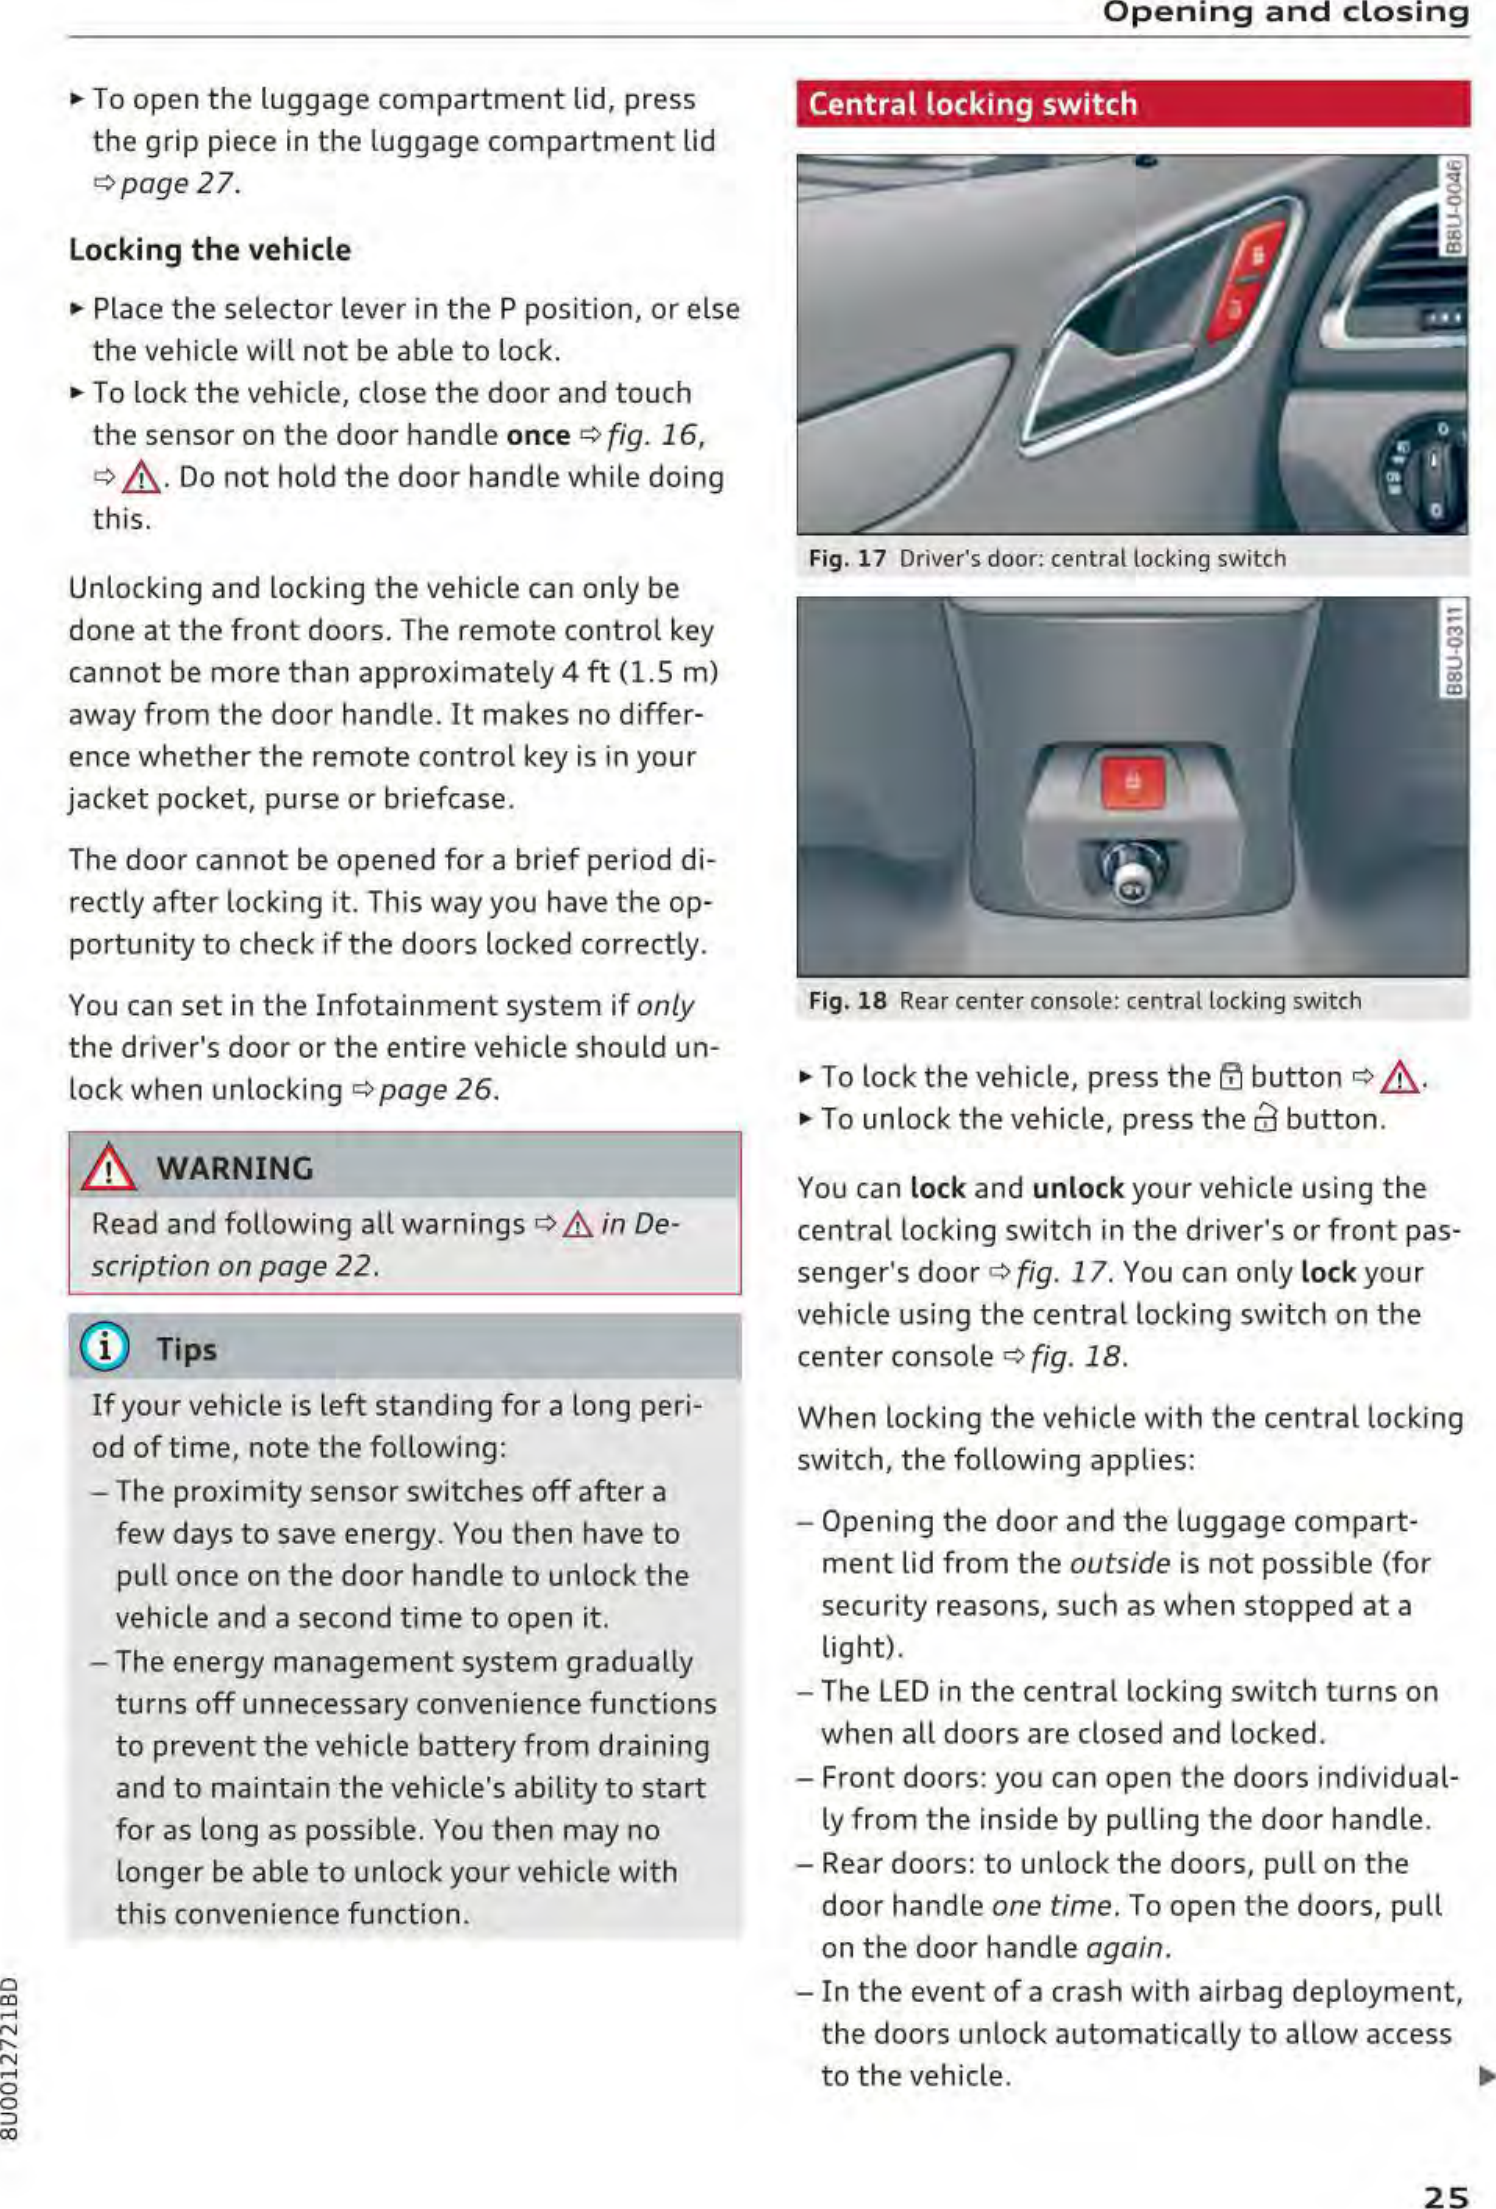 Page 27 of Robert Bosch Car Multimedia AUFPK20 Instrument cluster with immobilizer User Manual part 1